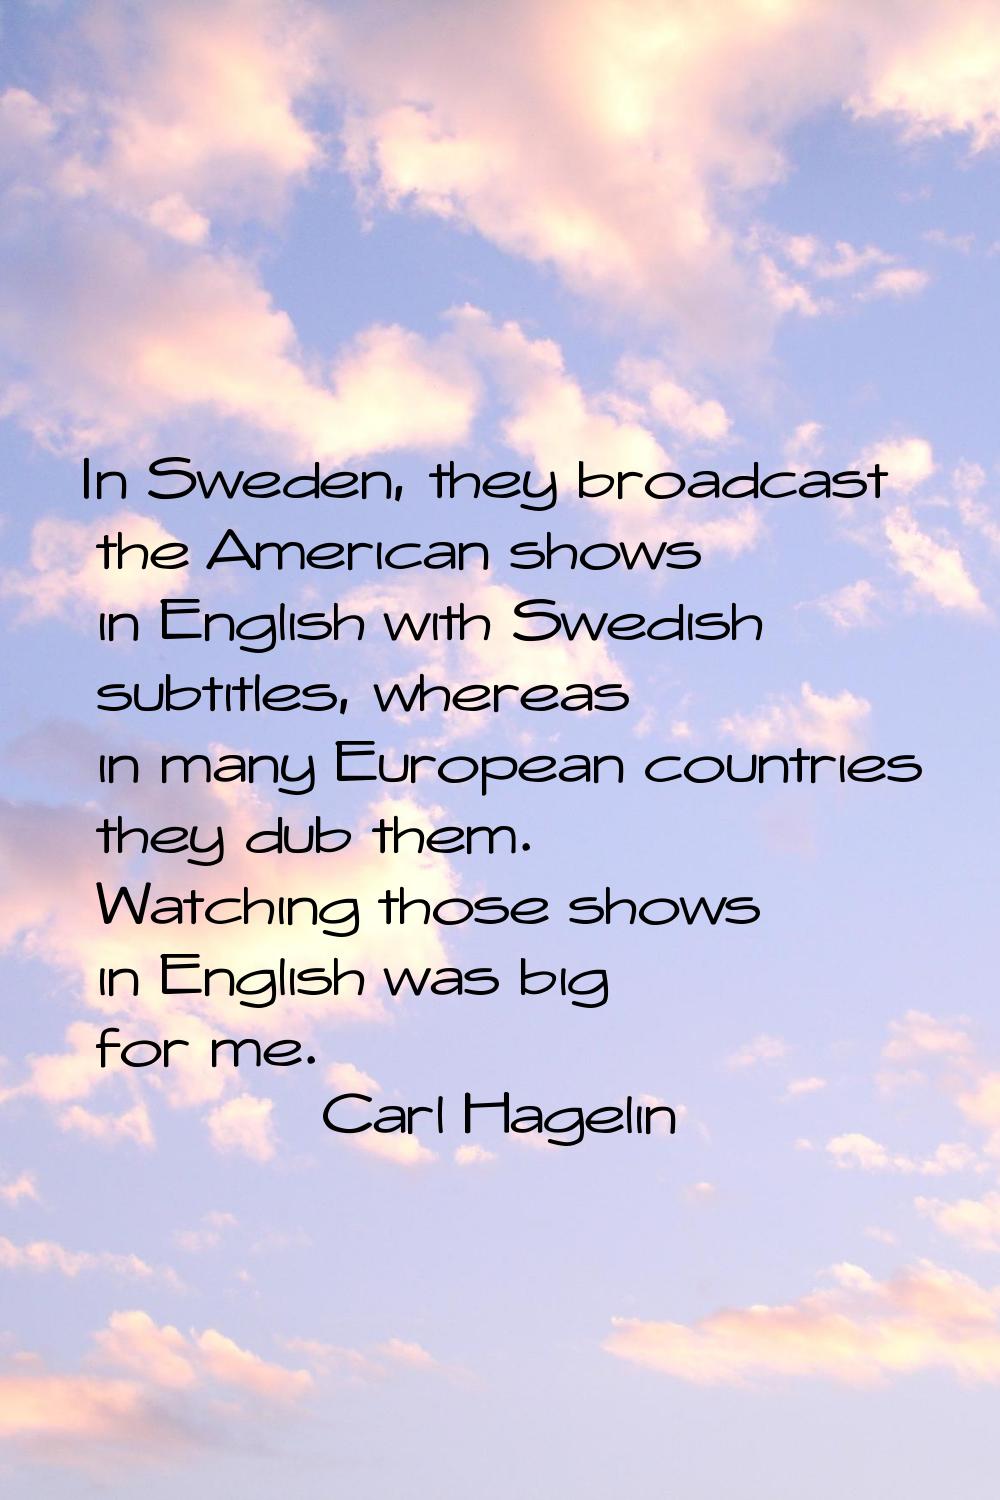 In Sweden, they broadcast the American shows in English with Swedish subtitles, whereas in many Eur